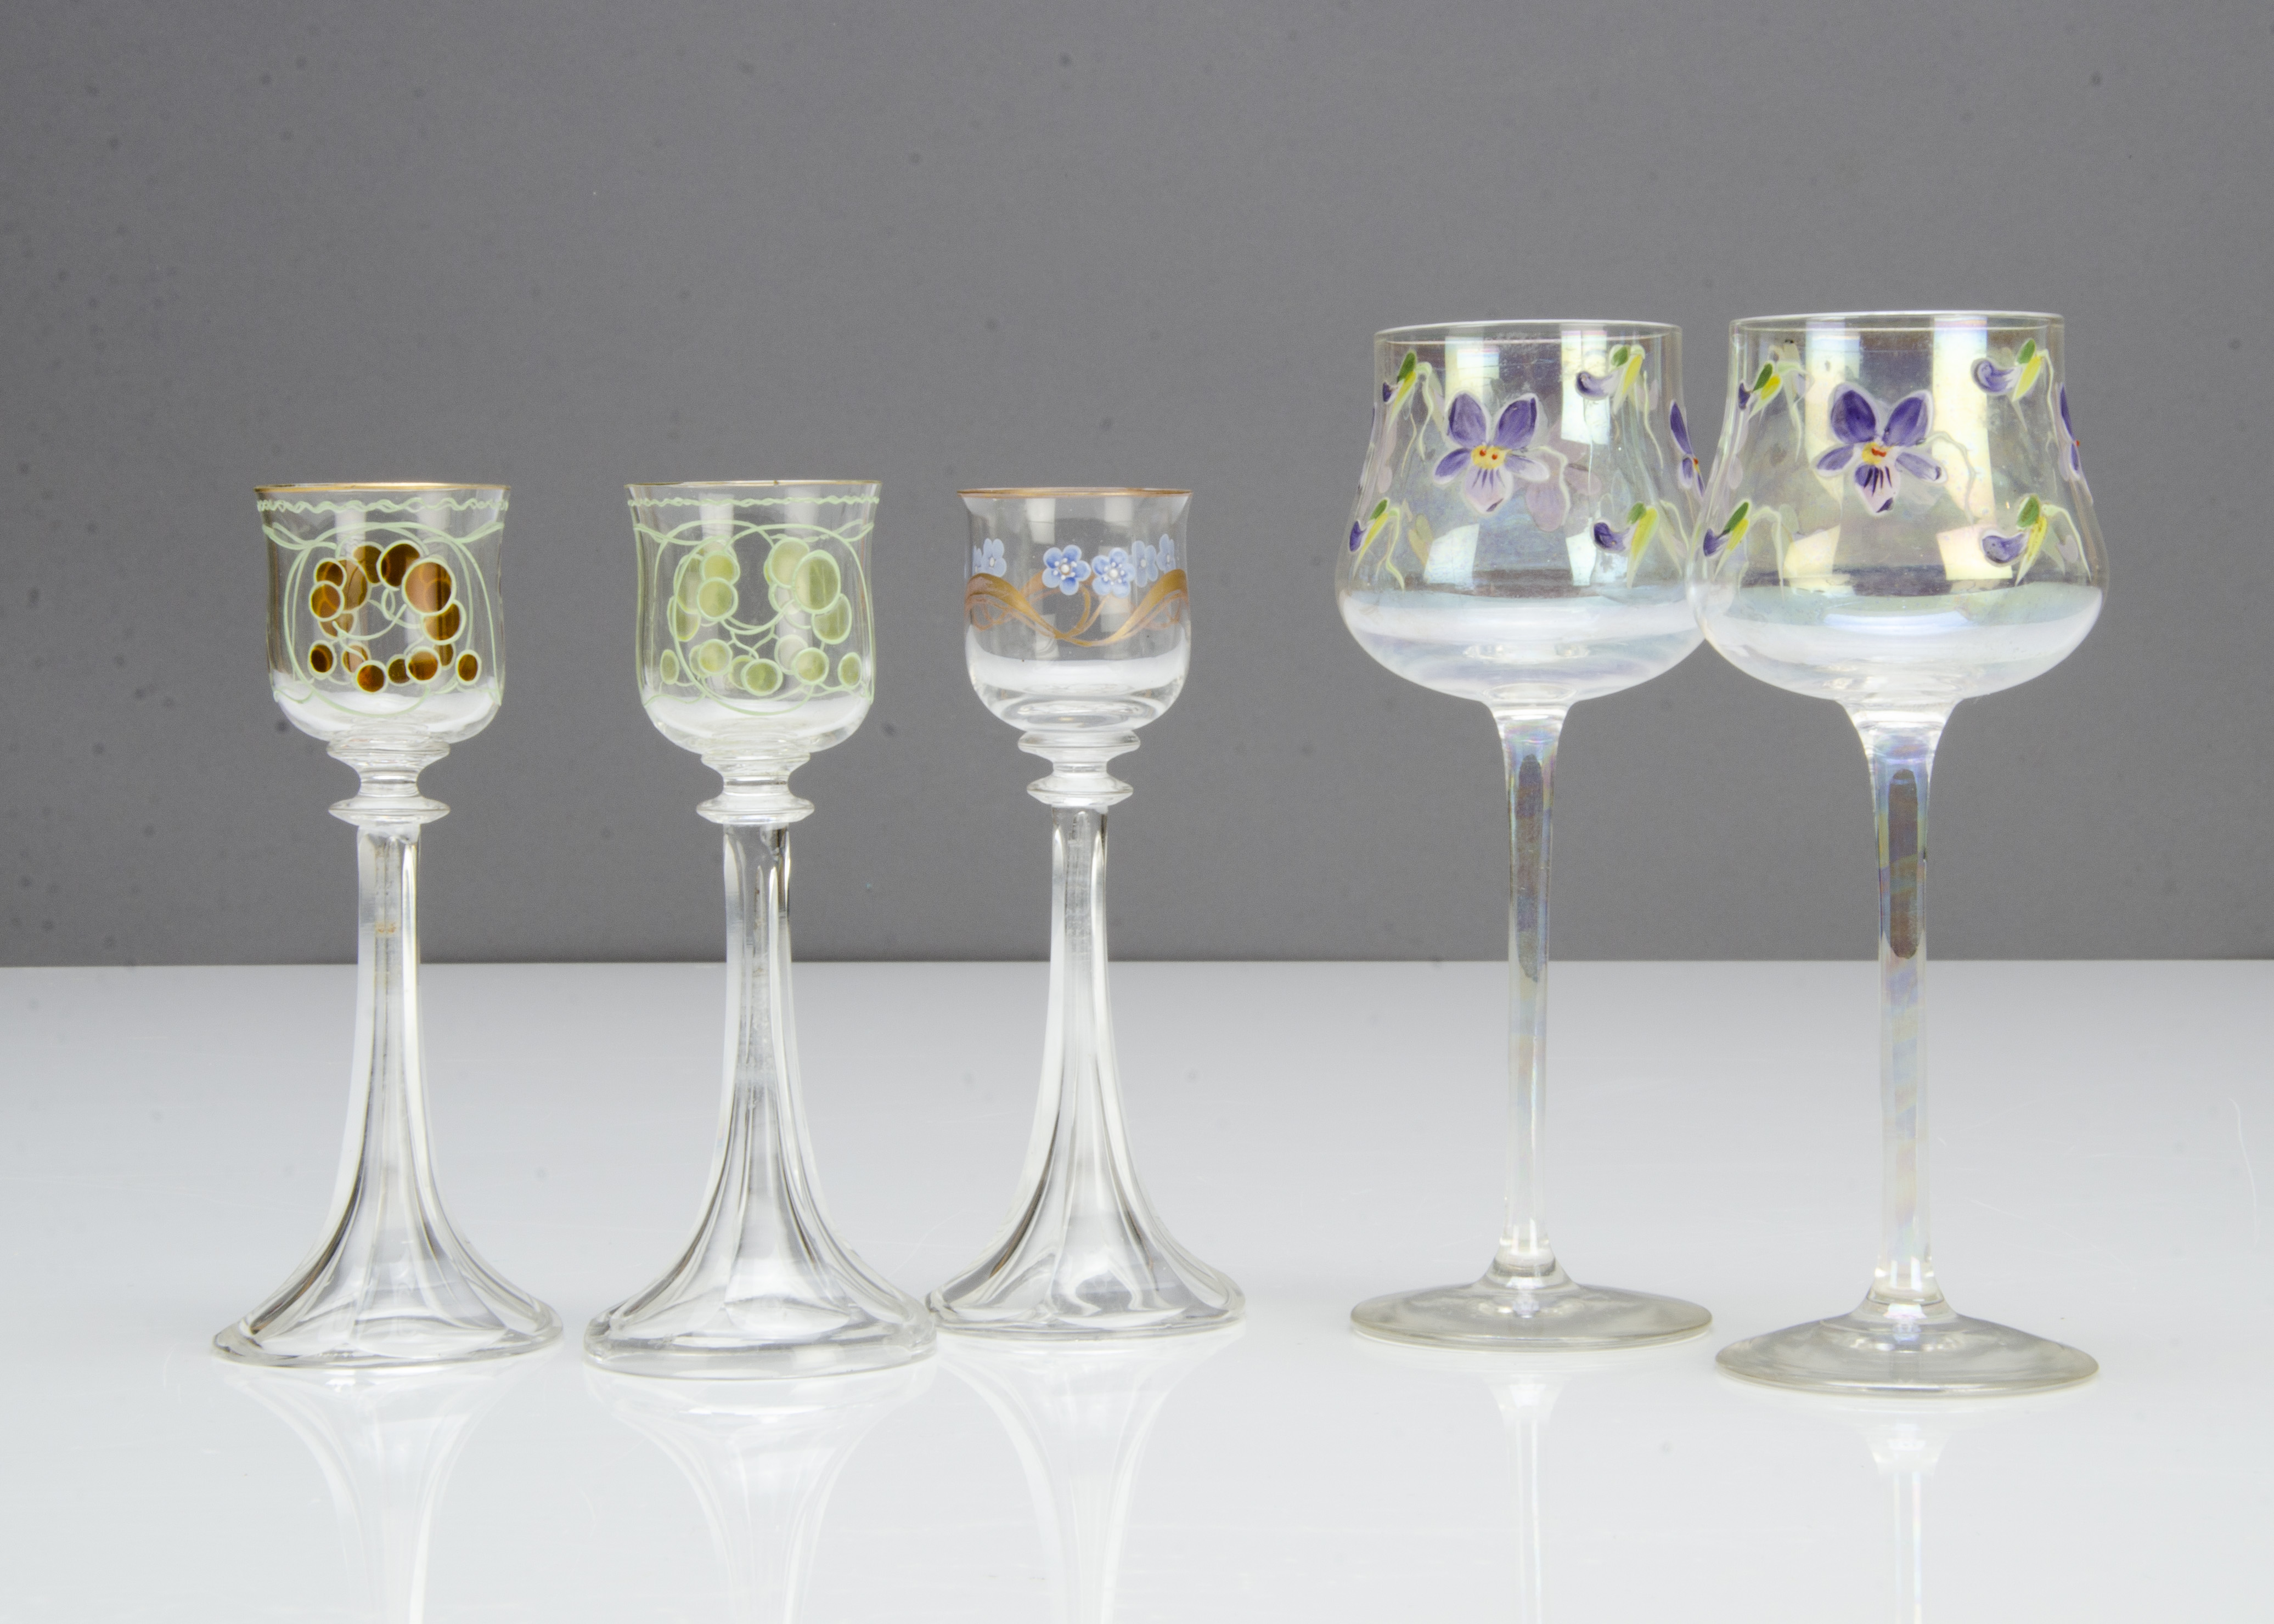 A pair of German Art Nouveau liquor glasses, in the Meyr's Neff style with green and amber floral